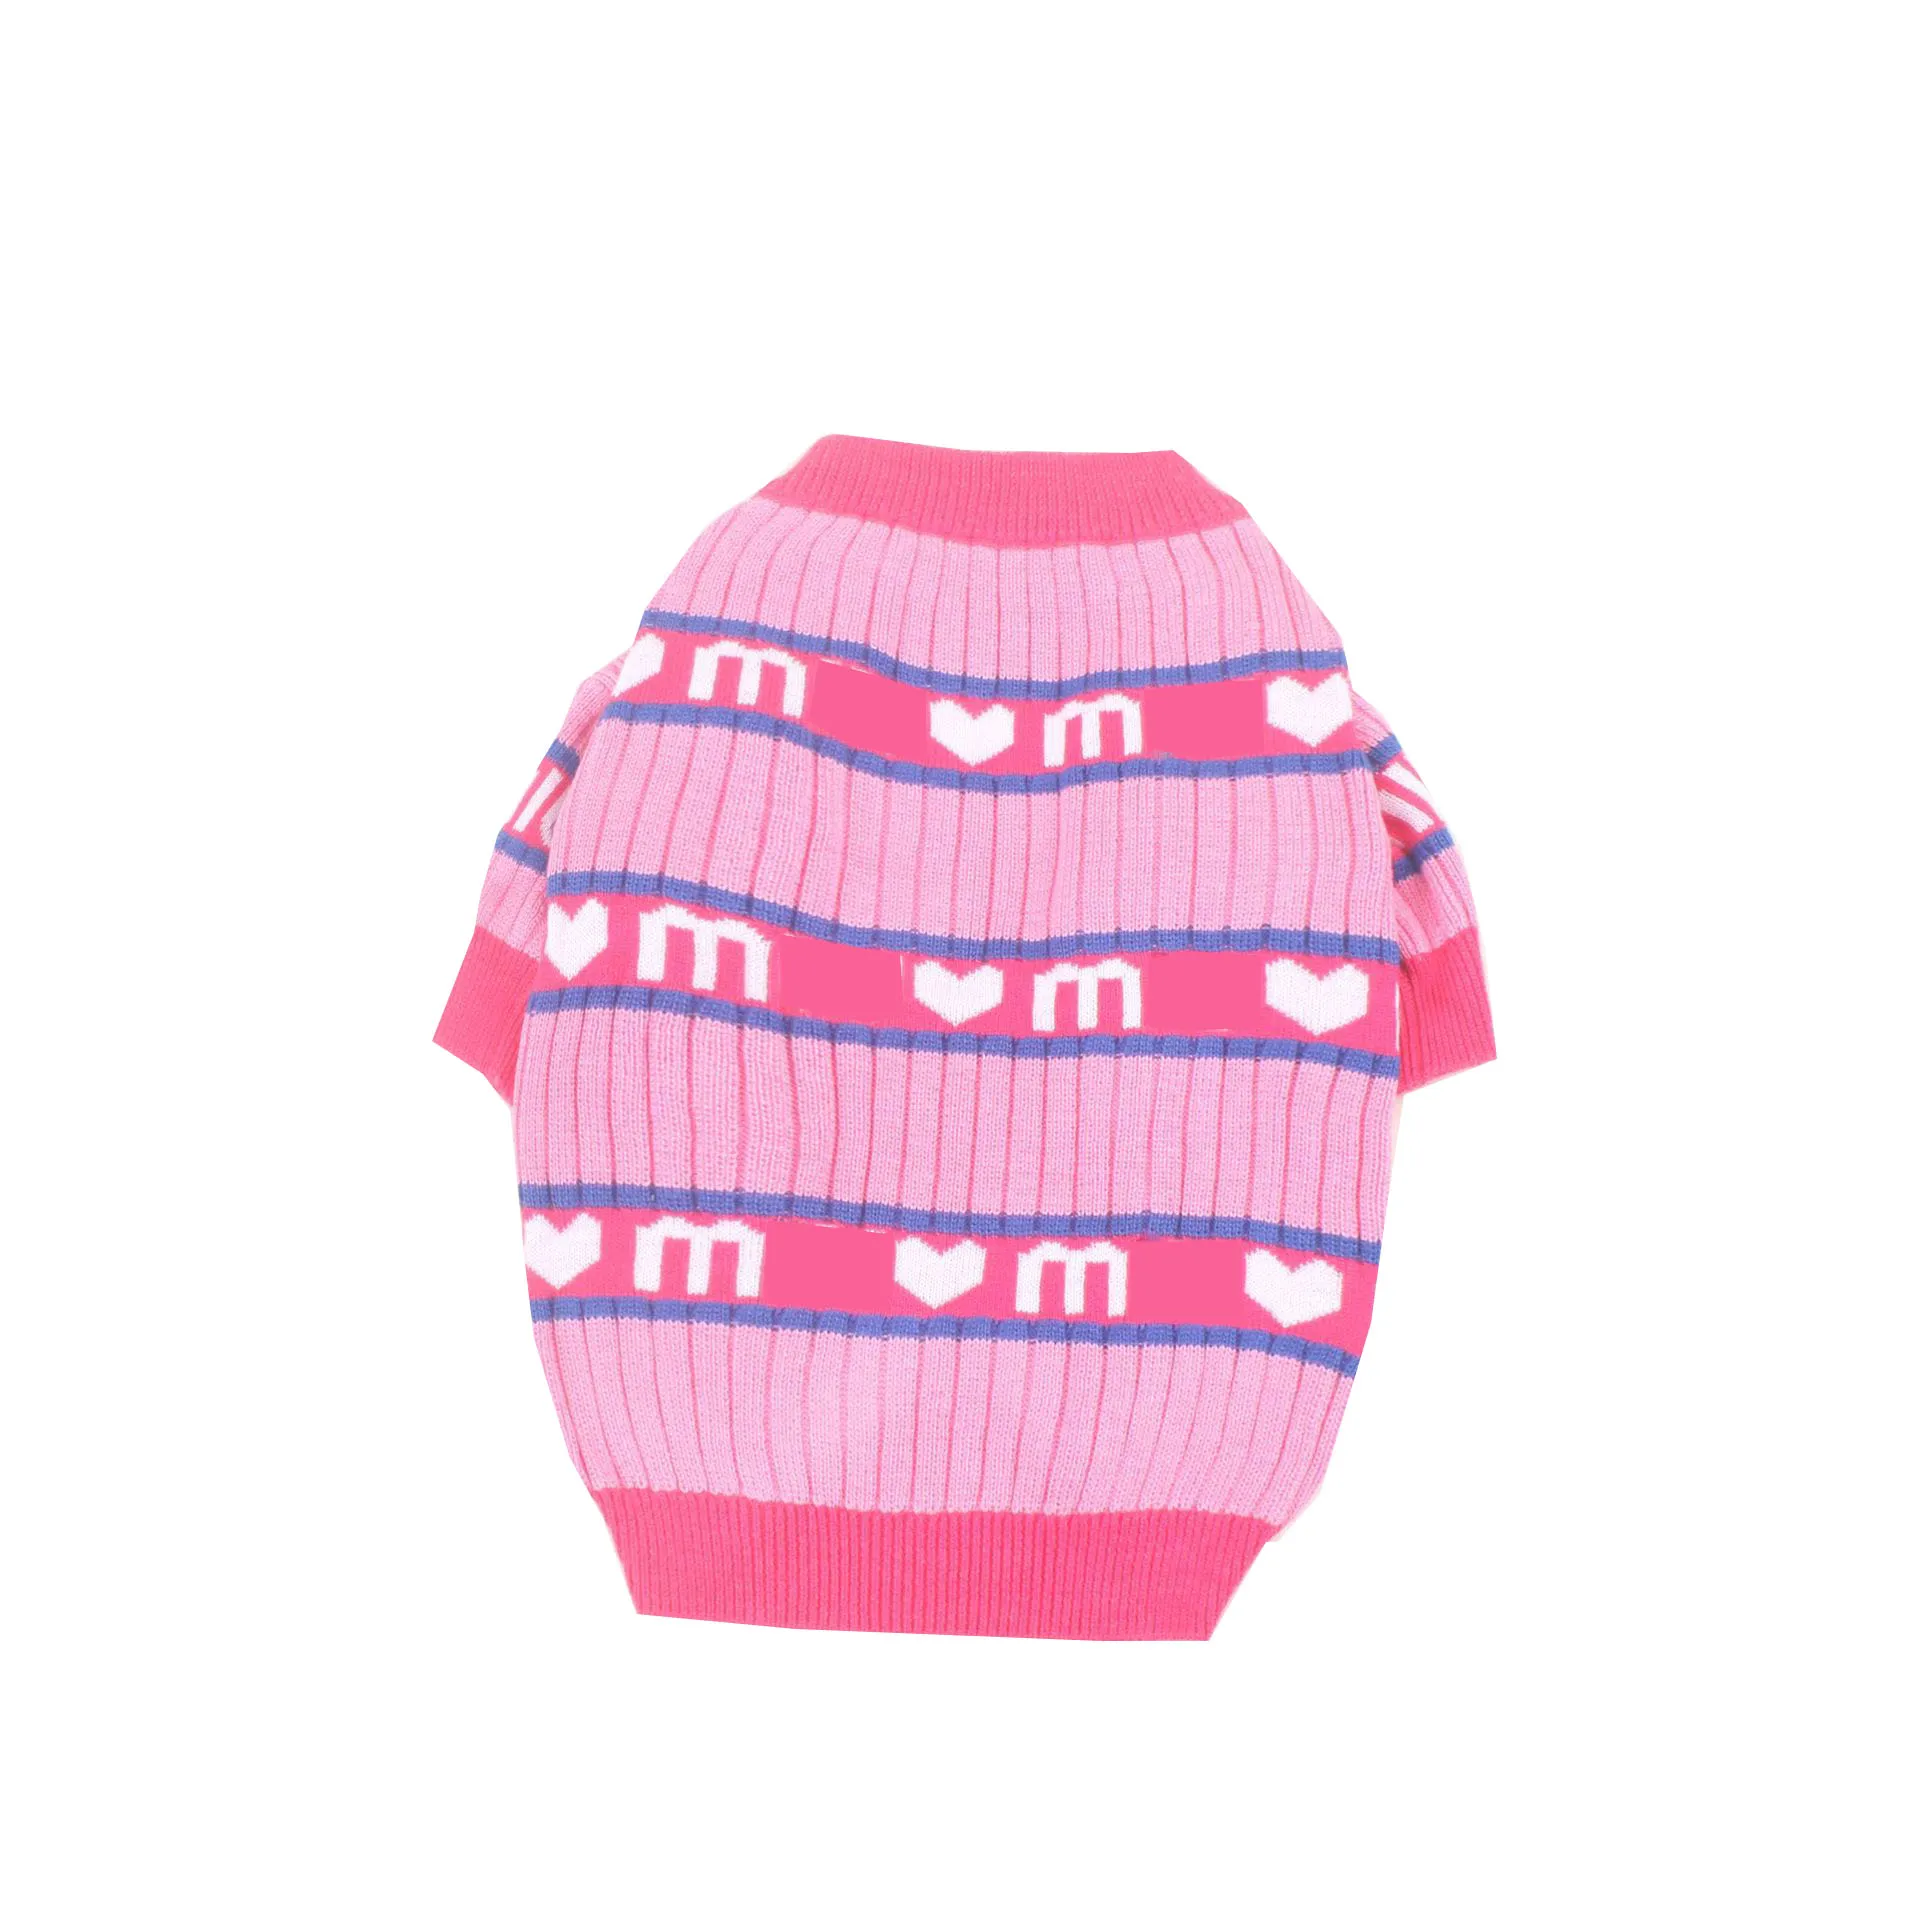 Pink Dogs Sweater T Shirt Striped Letter Sweatshirt Dog Apparel Teddy Bulldog Poodle Puppy Clothes Costume